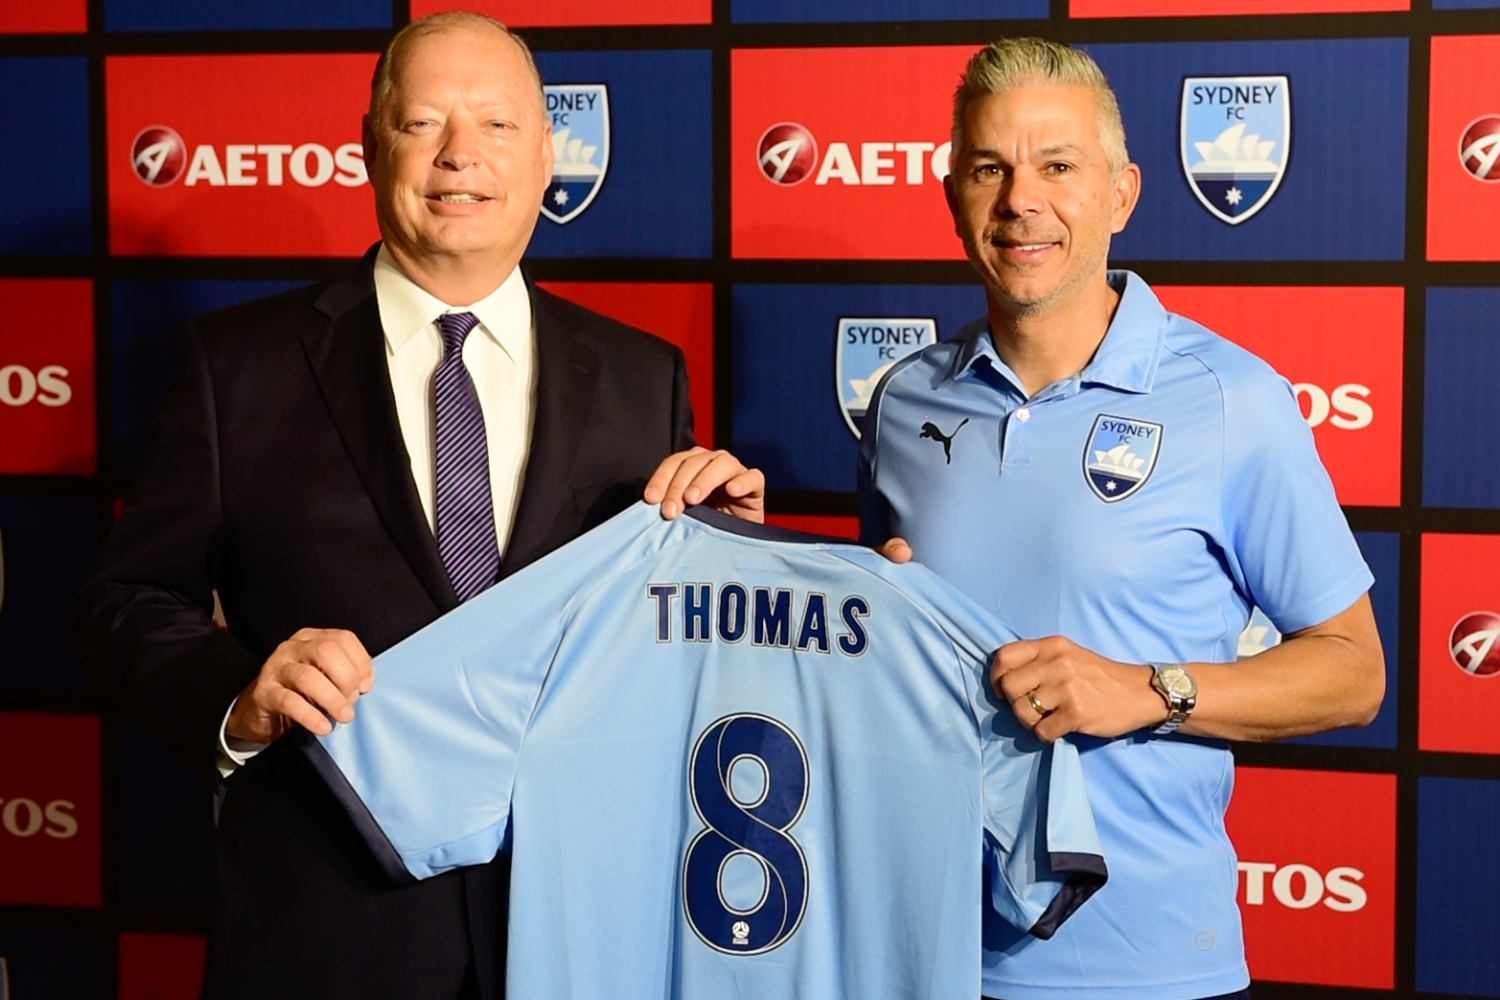 Sydney FC Head Coach Steve Corica presented the No. 8 jersey to Councillor Mike Thomas, to express the gratitude for AETOS’ support.